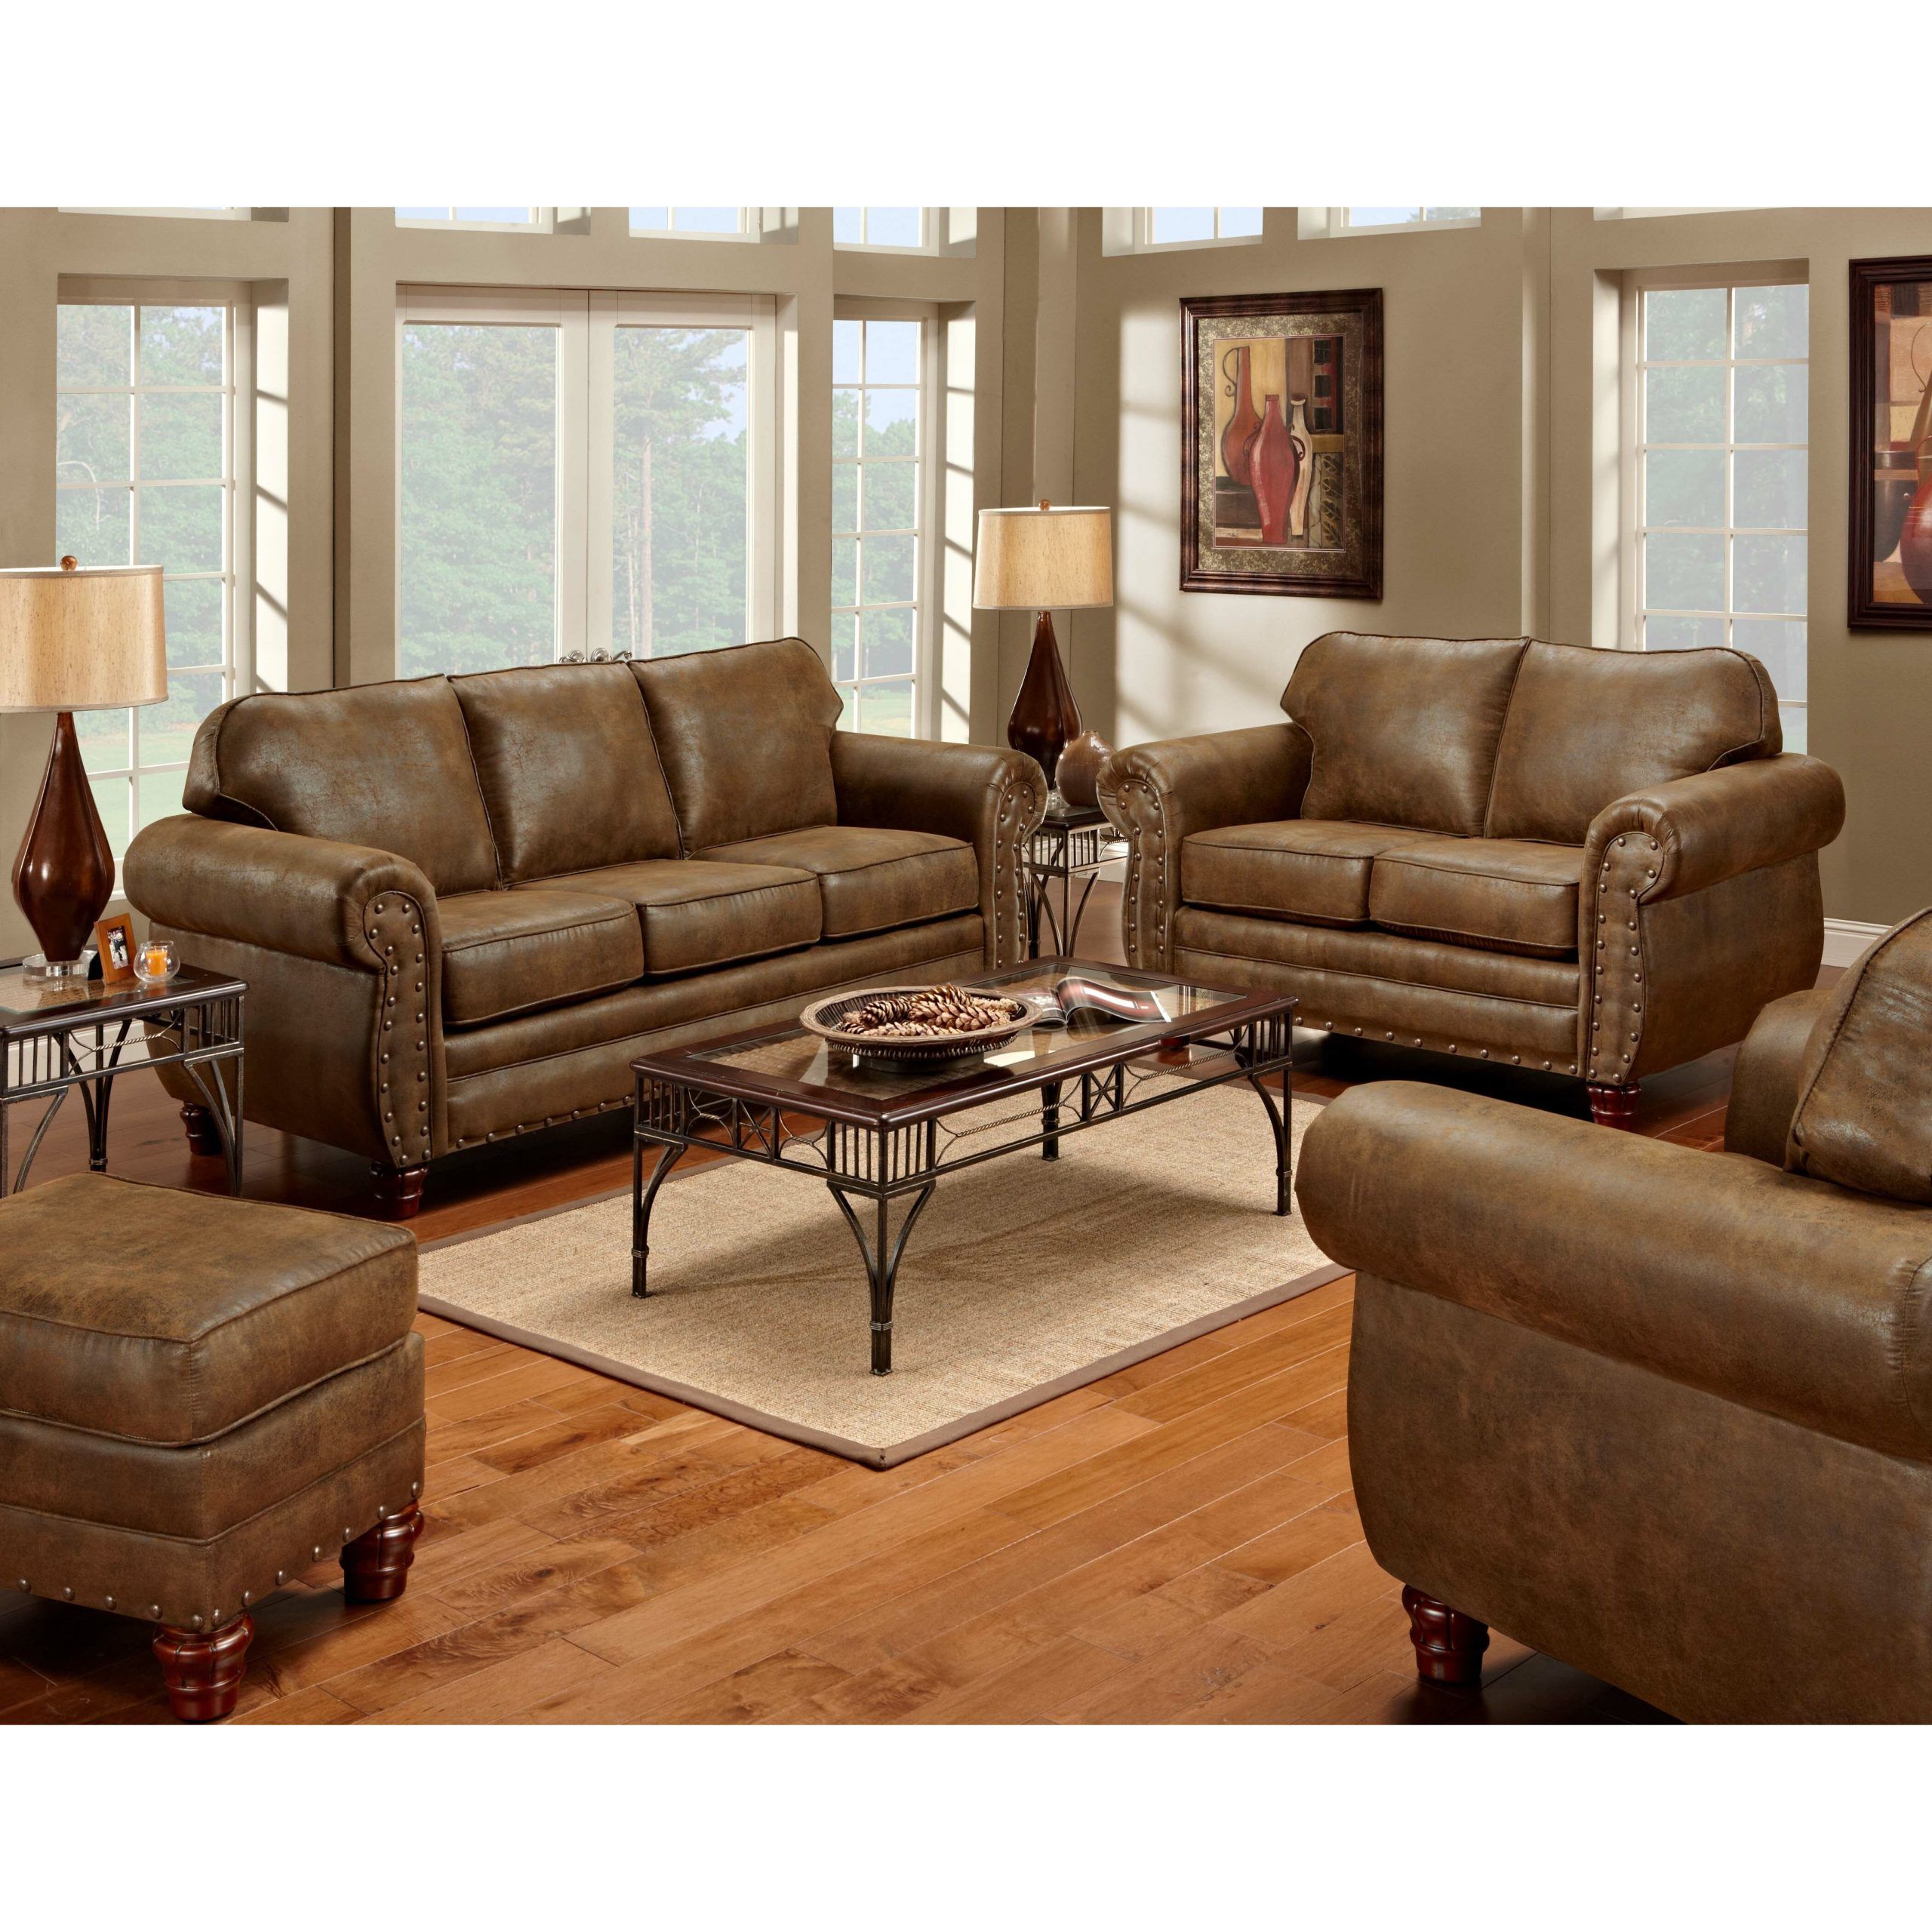 American Furniture Classics Sedona 4 Piece Living Room Set With Sleeper With Sofas For Living Rooms (View 7 of 20)